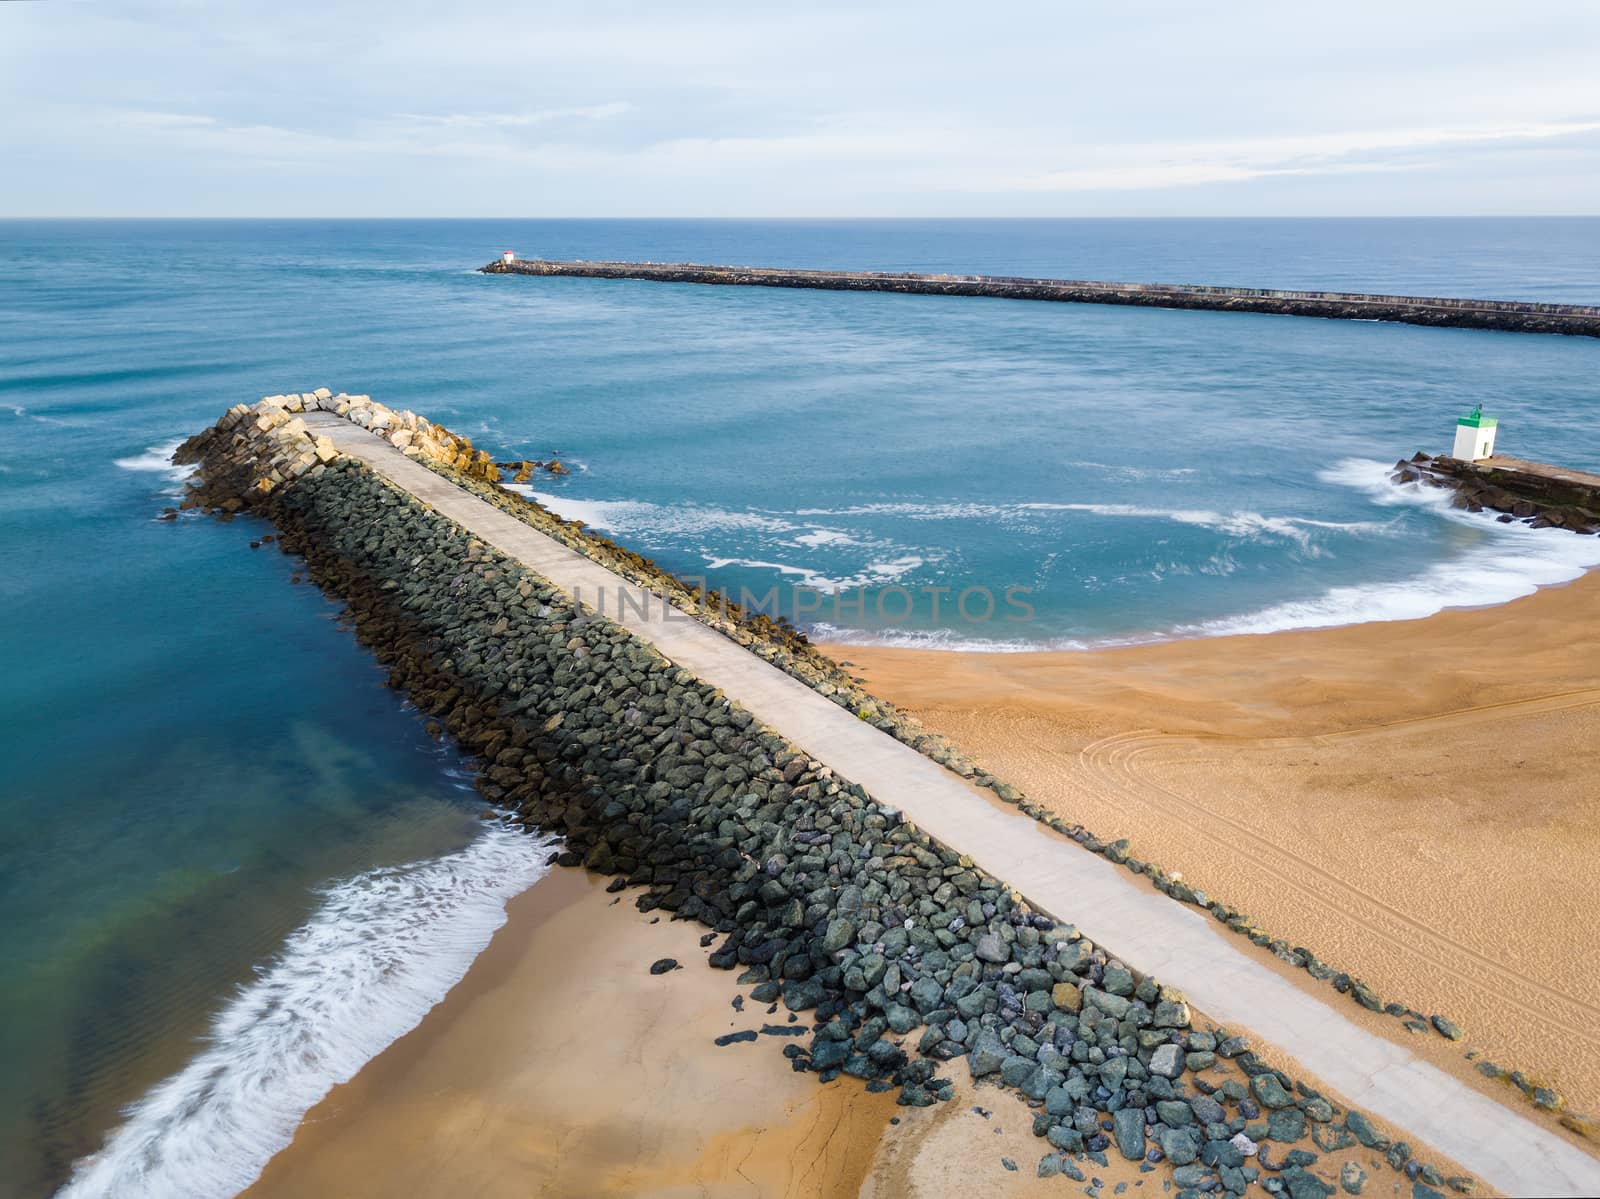 La Barre aerial view in Anglet, France. Beach, dikes and the Atlantic ocean.